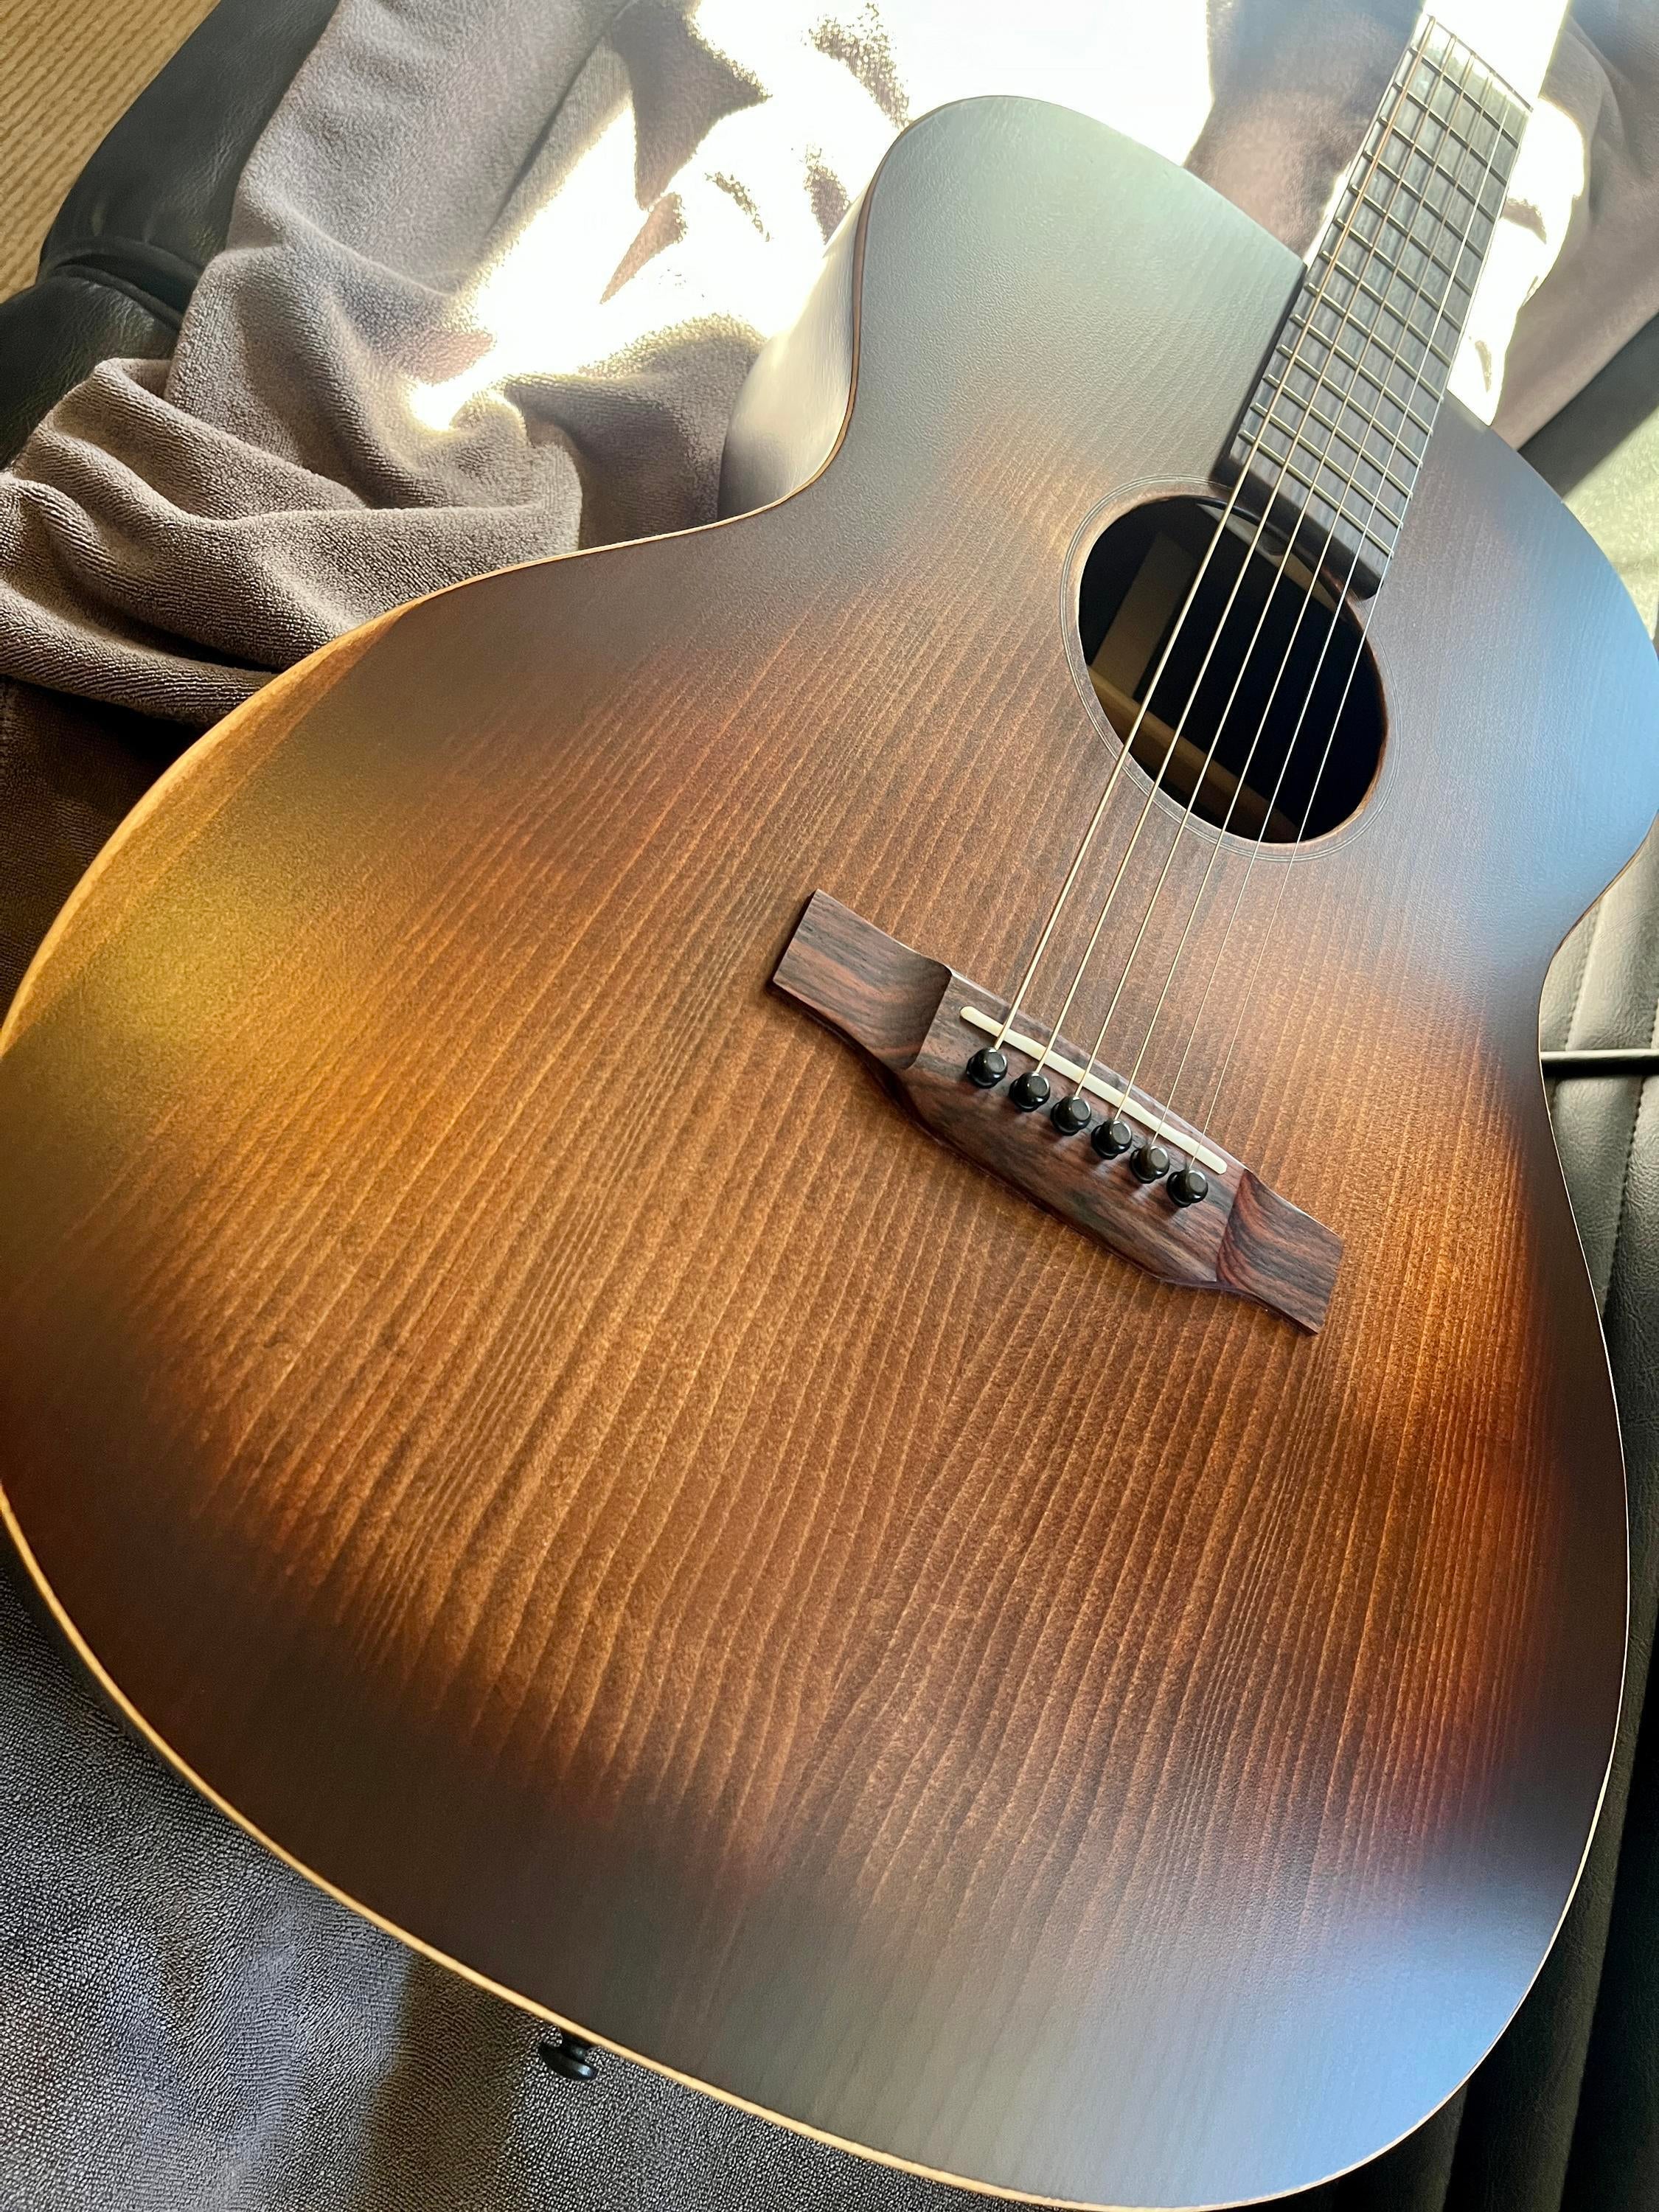 Used Martin 000-16 StreetMaster Acoustic - Sweetwater's Gear Exchange